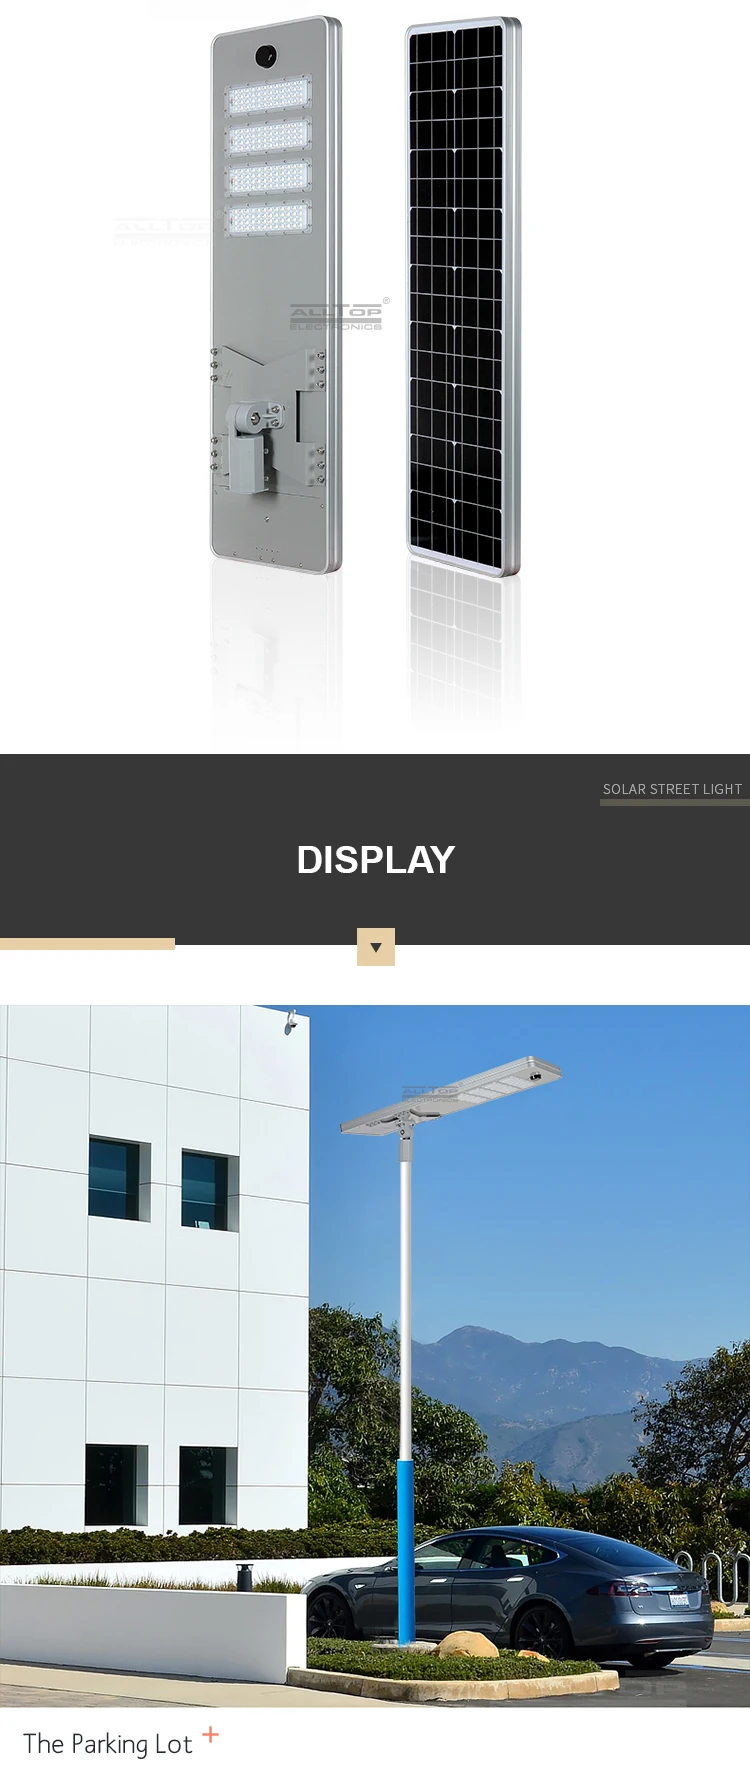 ALLTOP High quality outdoor park building lighting ip65 smd 50w 100w 150w 200w integrated all in one led solar street light